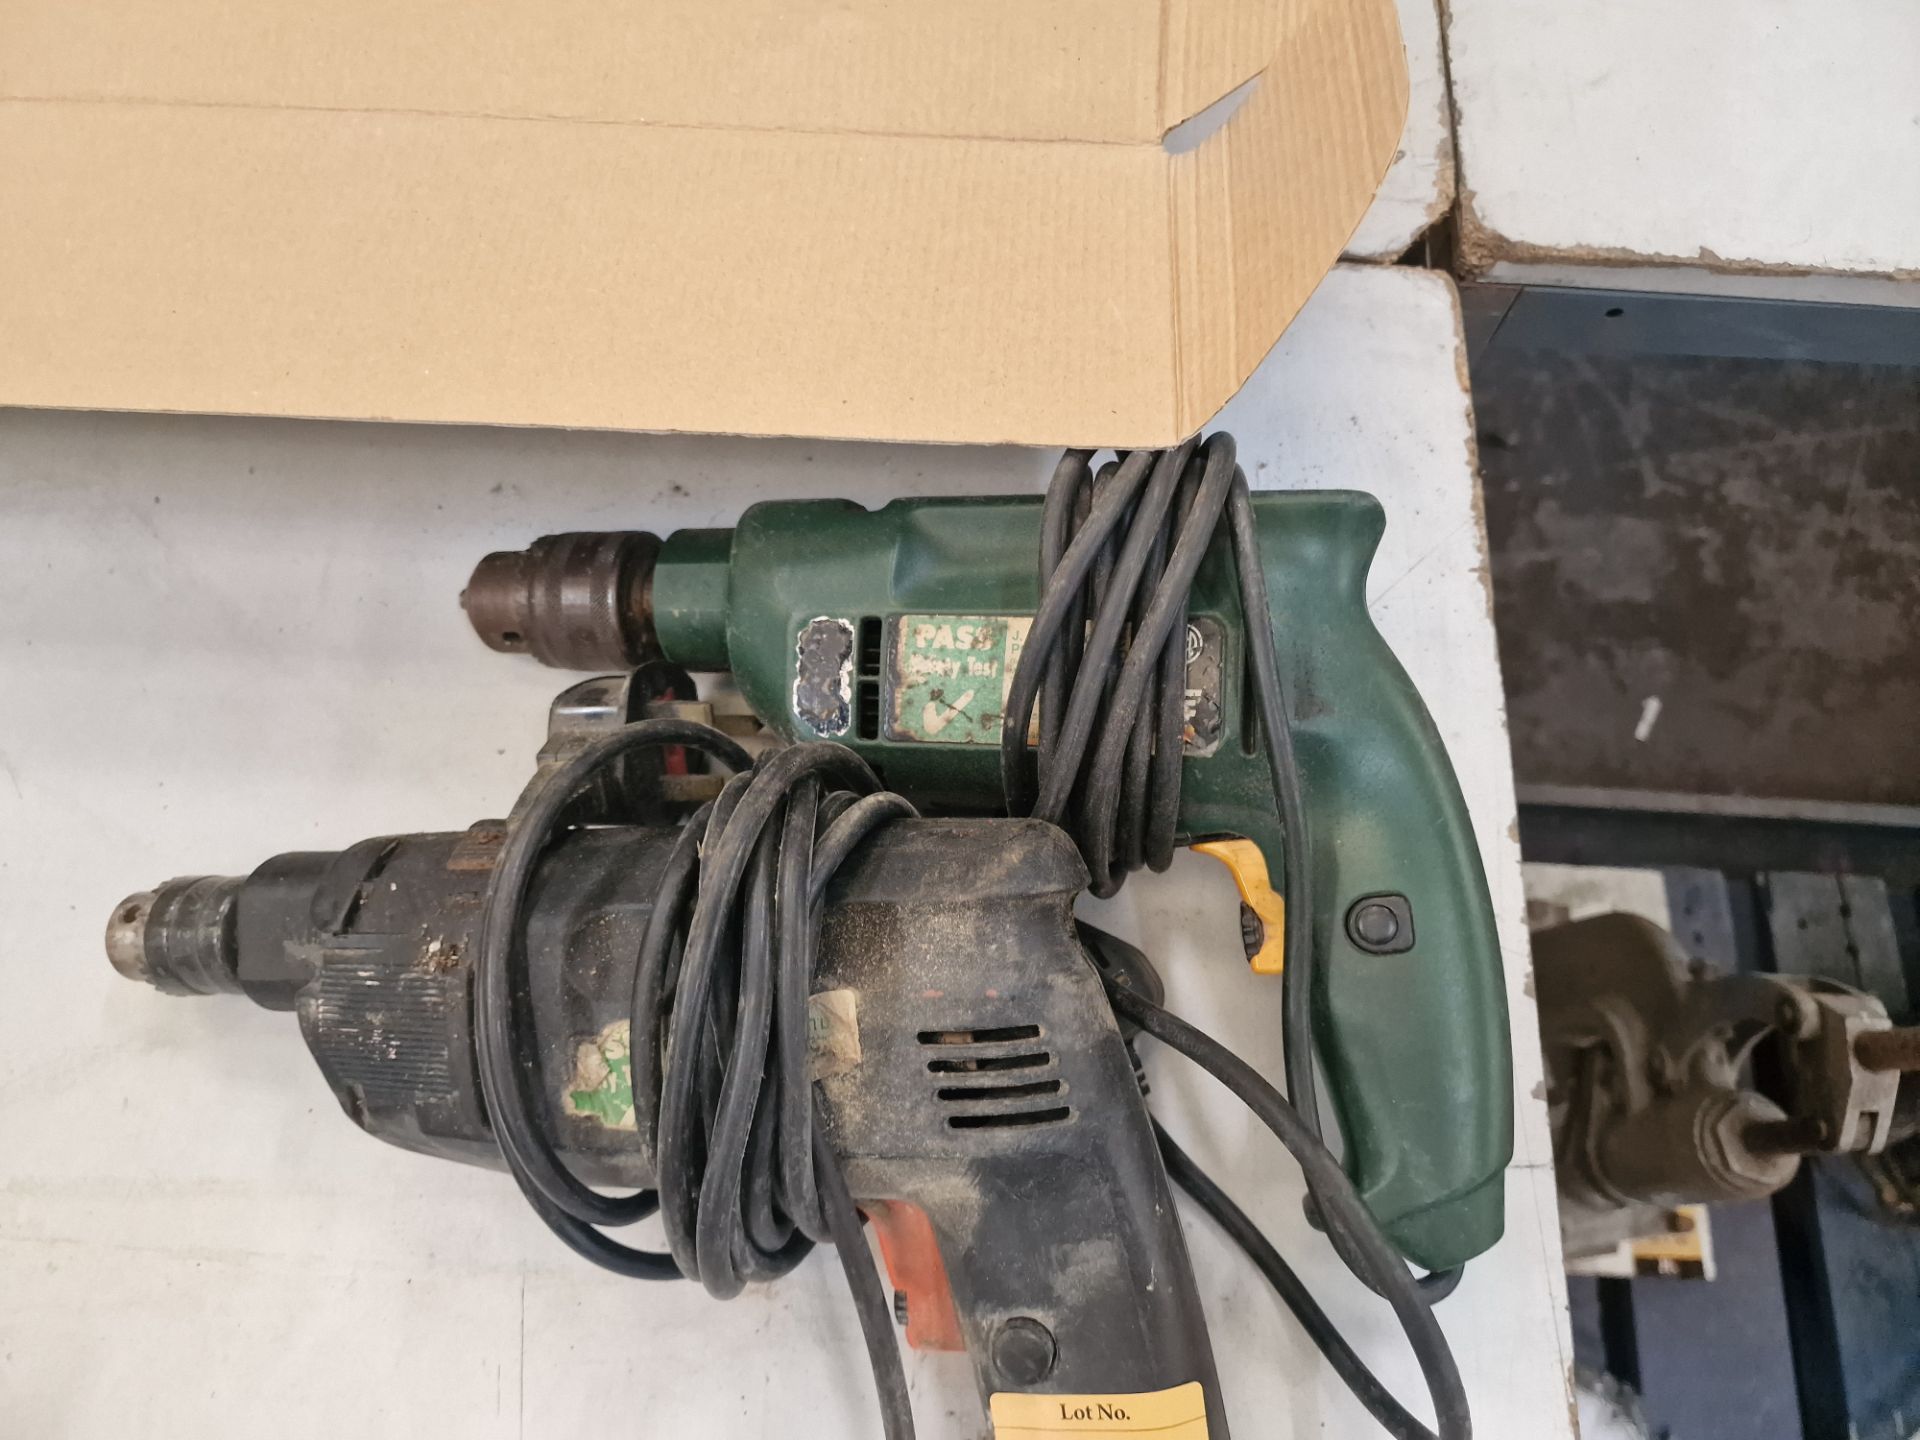 2 off corded electric drills - Image 3 of 3